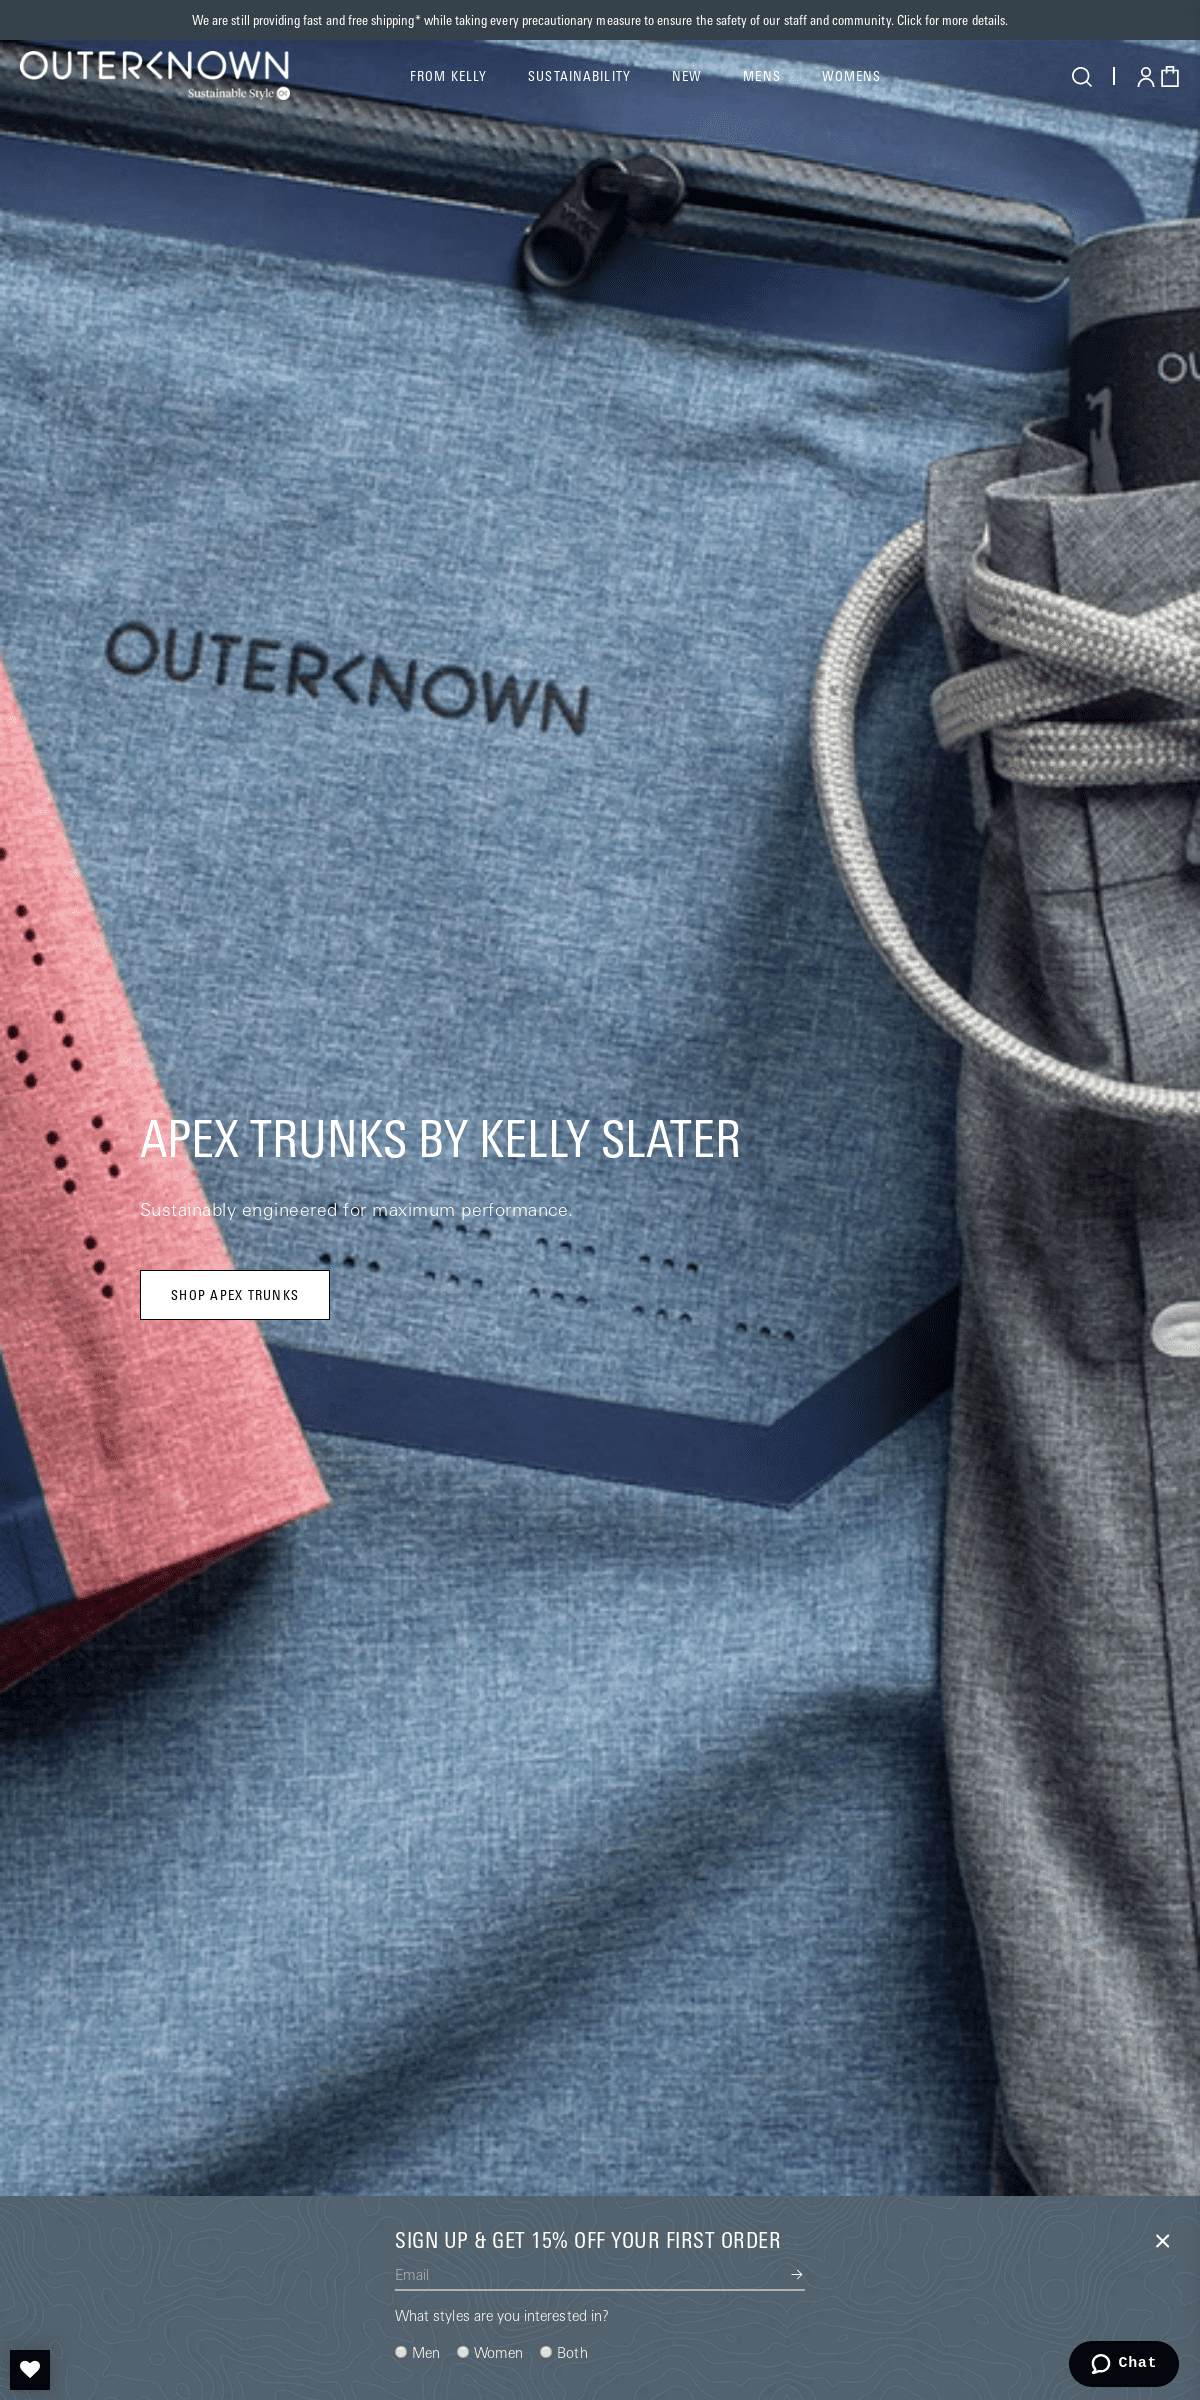 A complete backup of outerknown.com